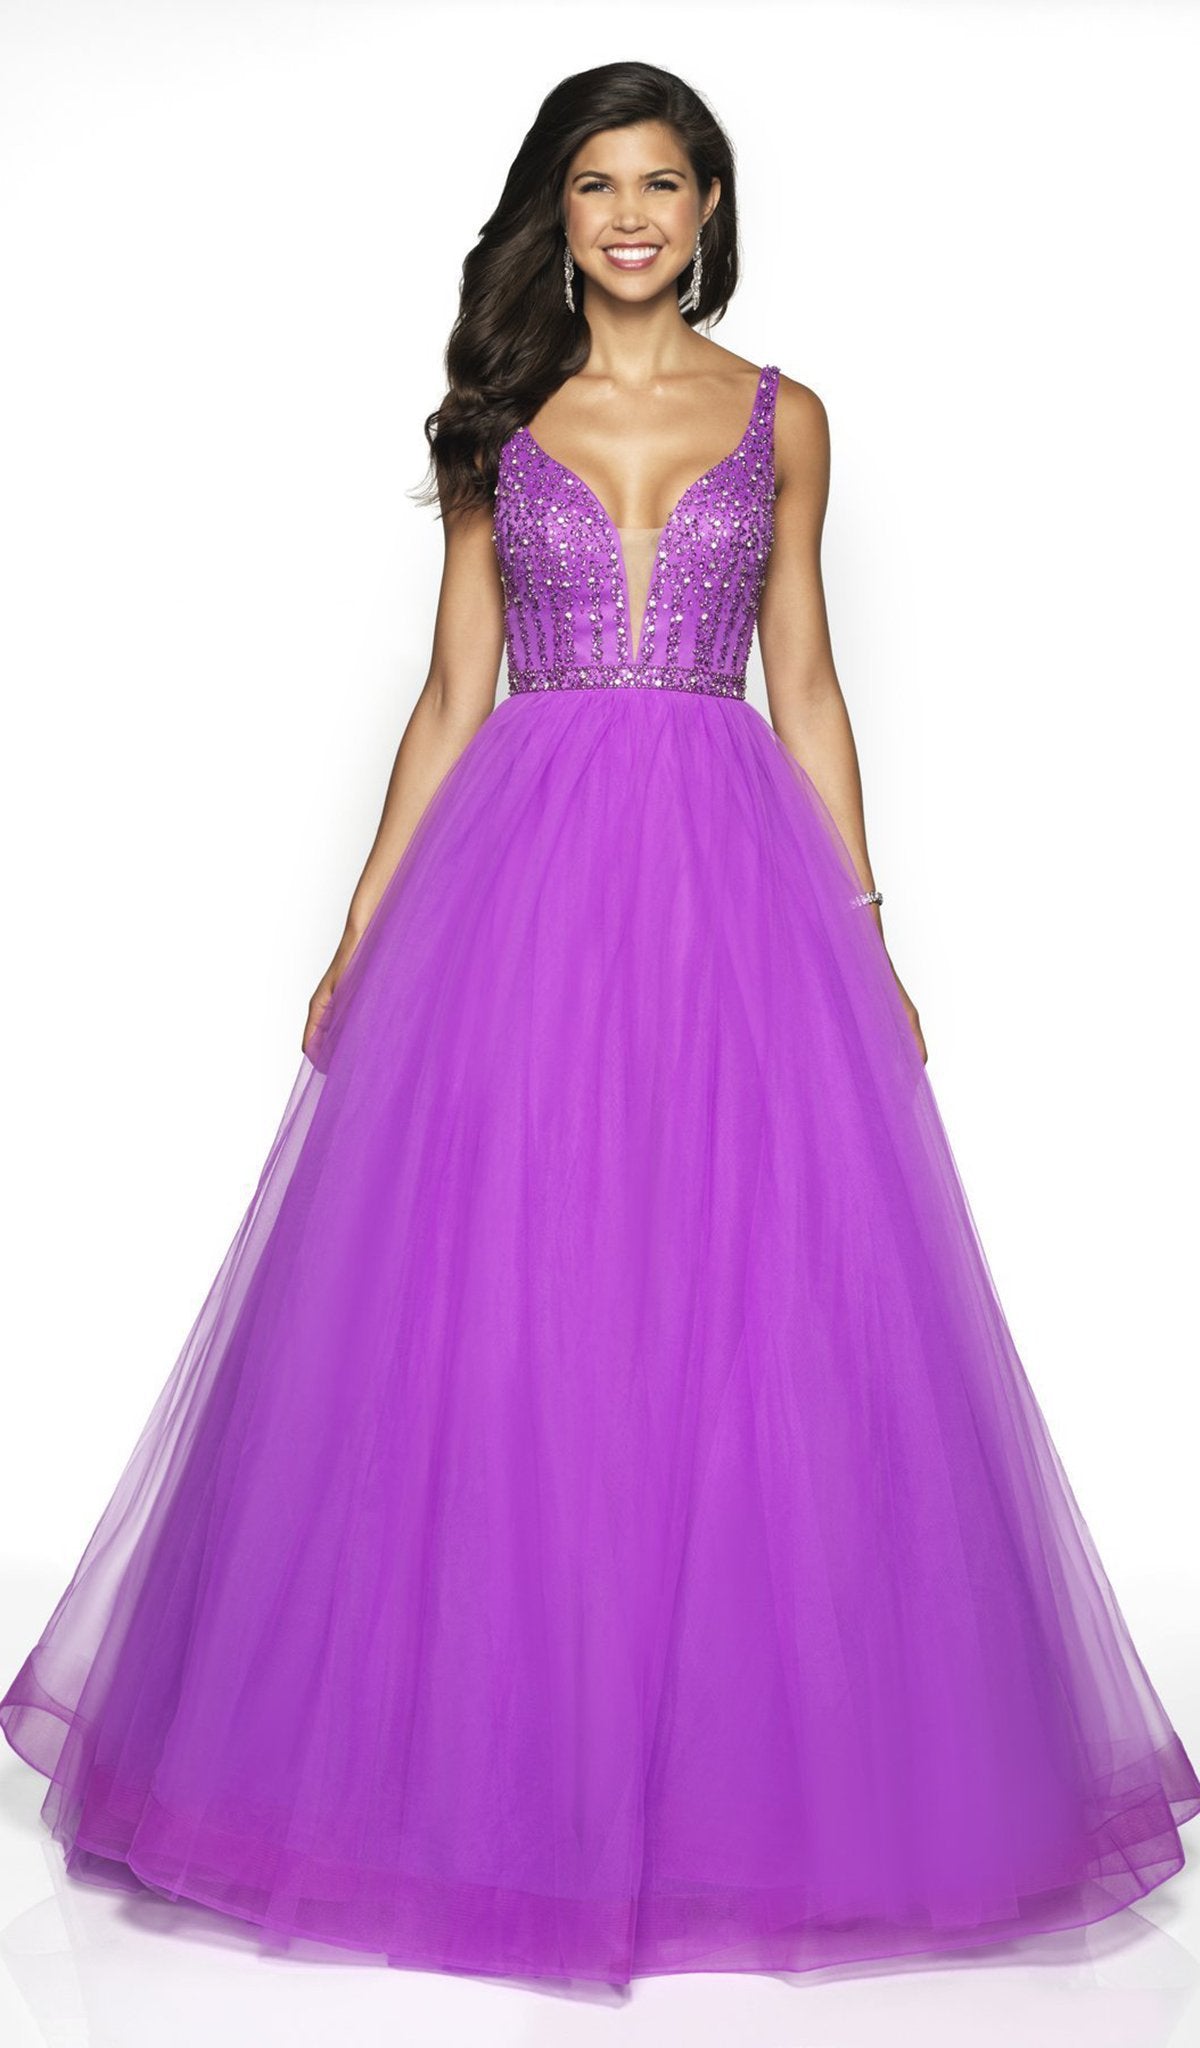 Blush by Alexia Designs - 5707 Beaded Deep V-neck Tulle Ballgown In Purple